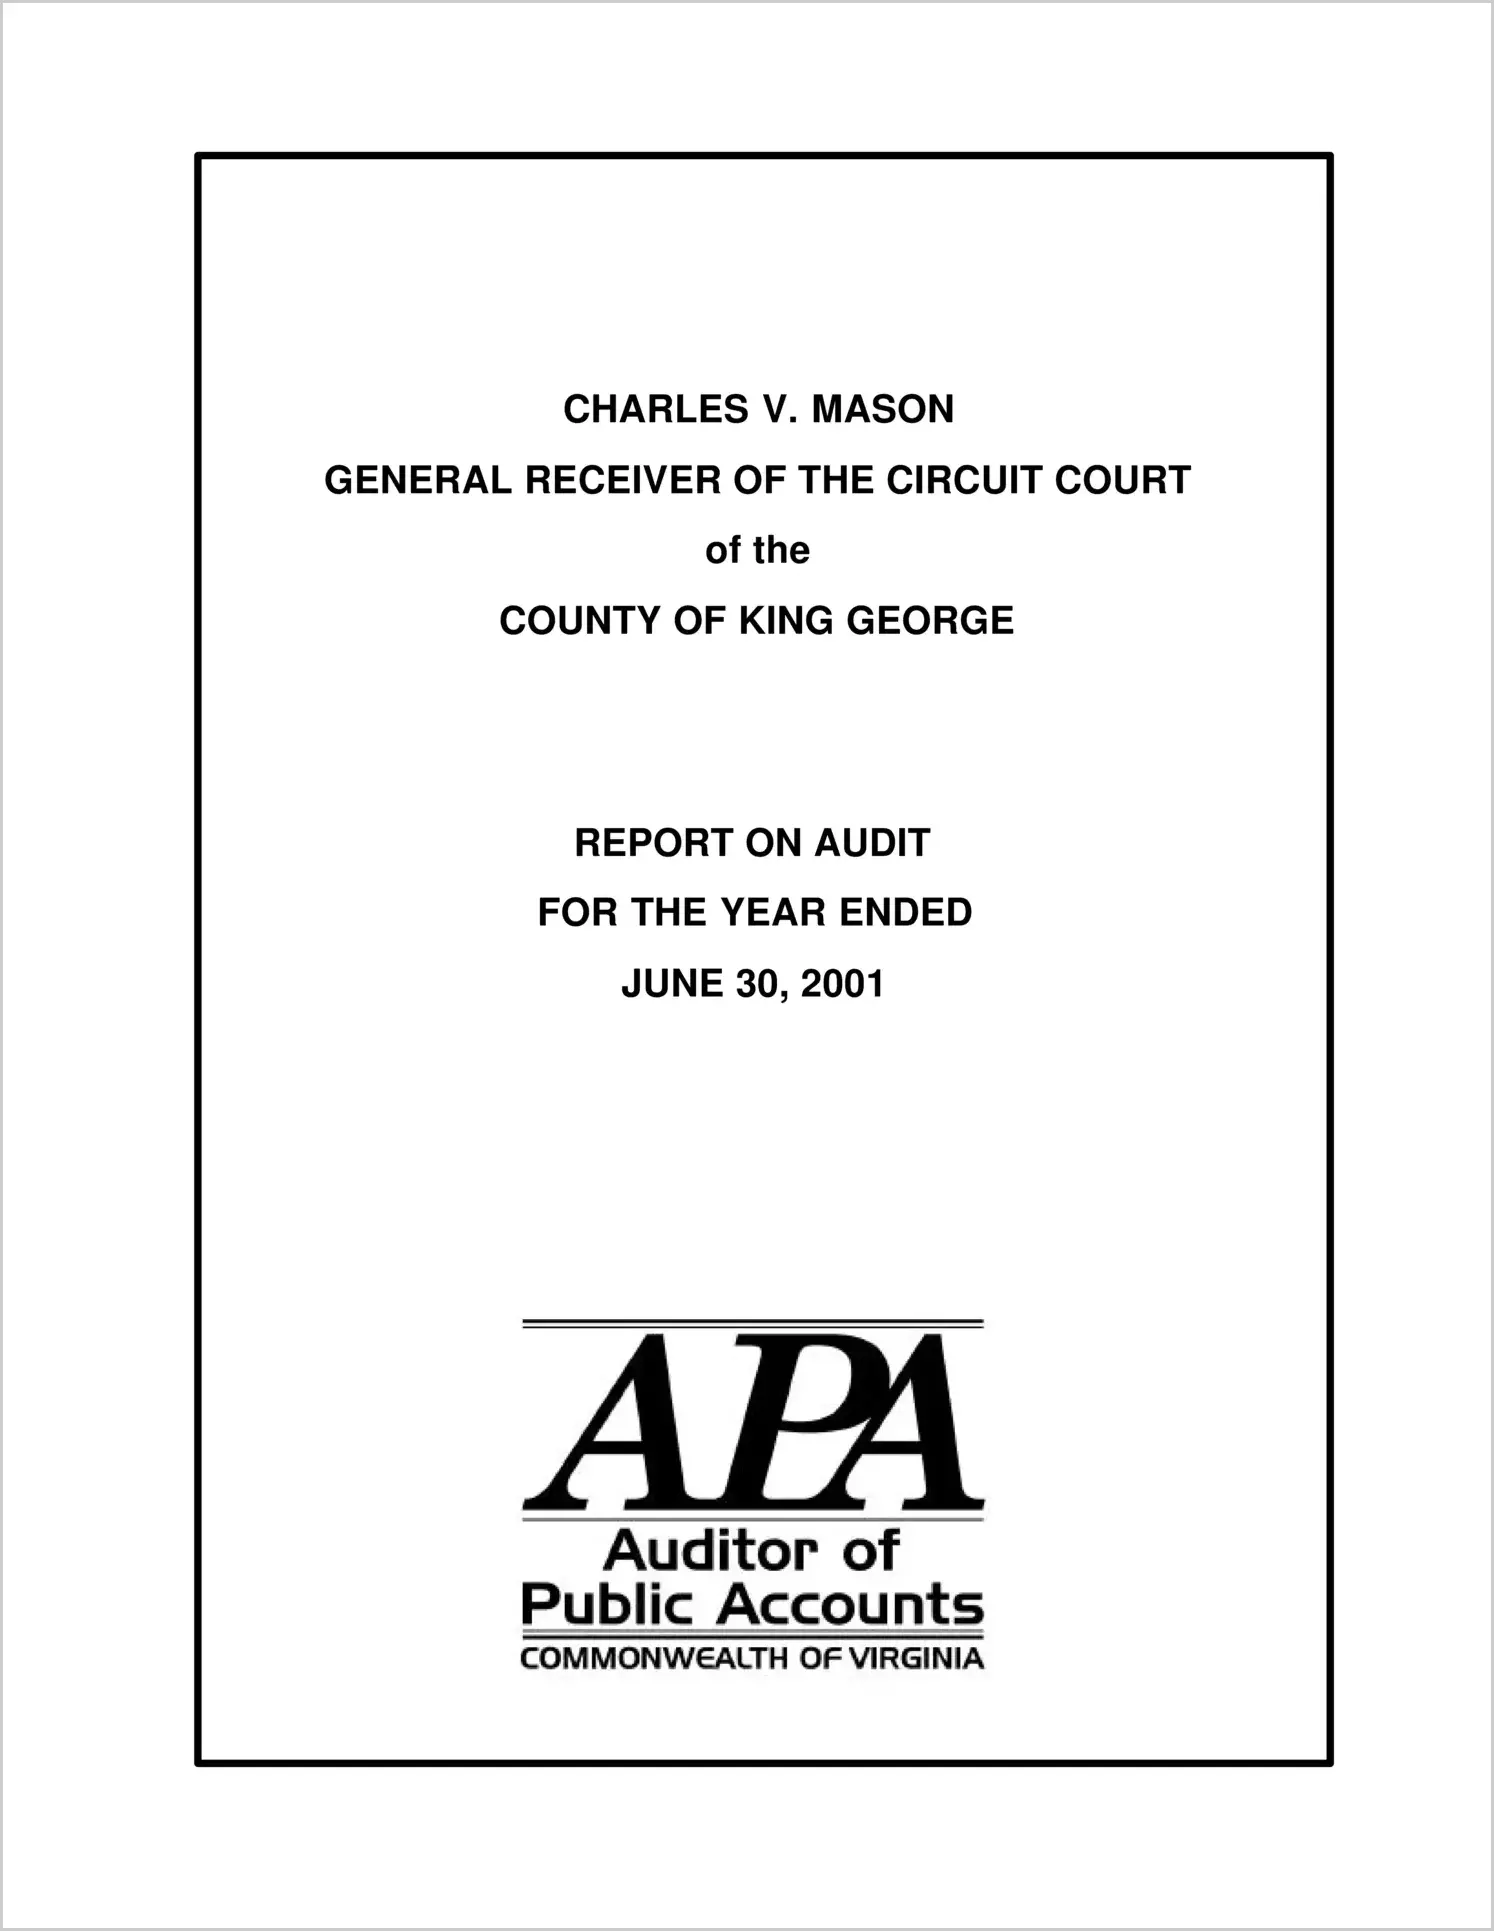 General Receiver of the Circuit Court of the County of King George for the year ended June 30, 2001